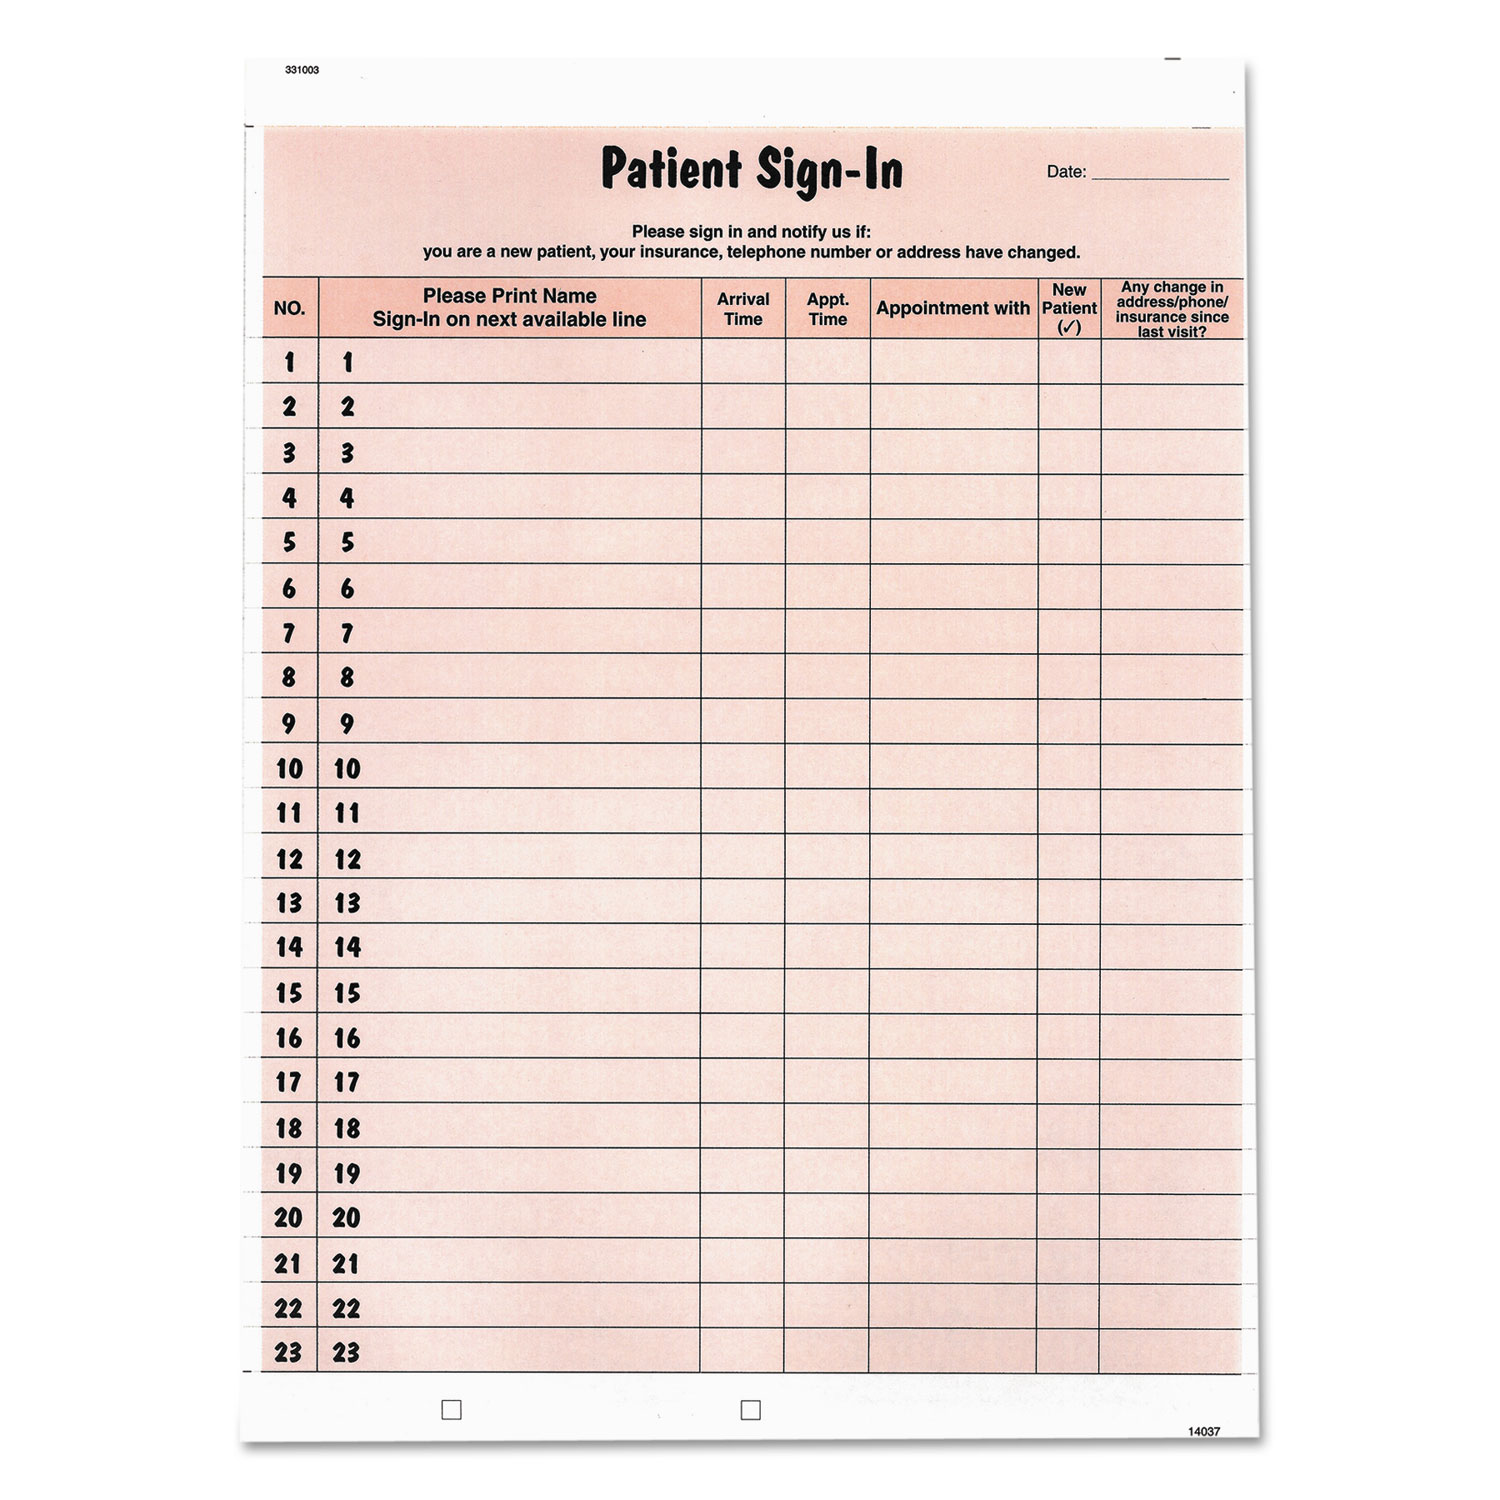 Patient Sign-In Label Forms, Two-Part Carbon, 8.5 x 11.63, Salmon Sheets, 125 Forms Total